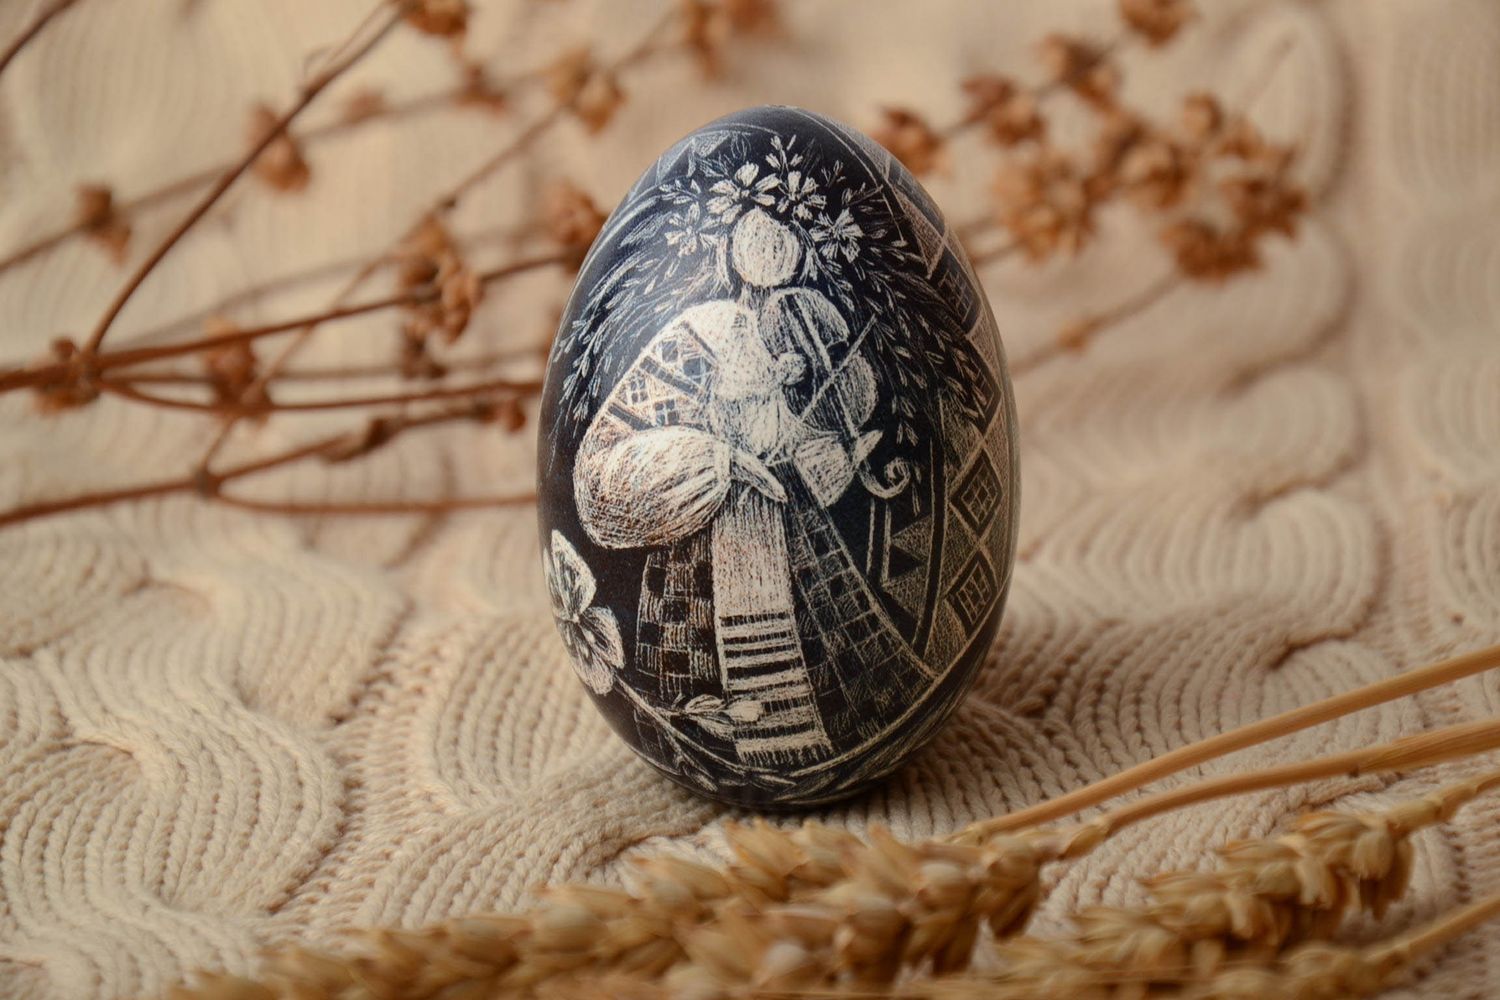 Painted egg for Easter decor photo 1